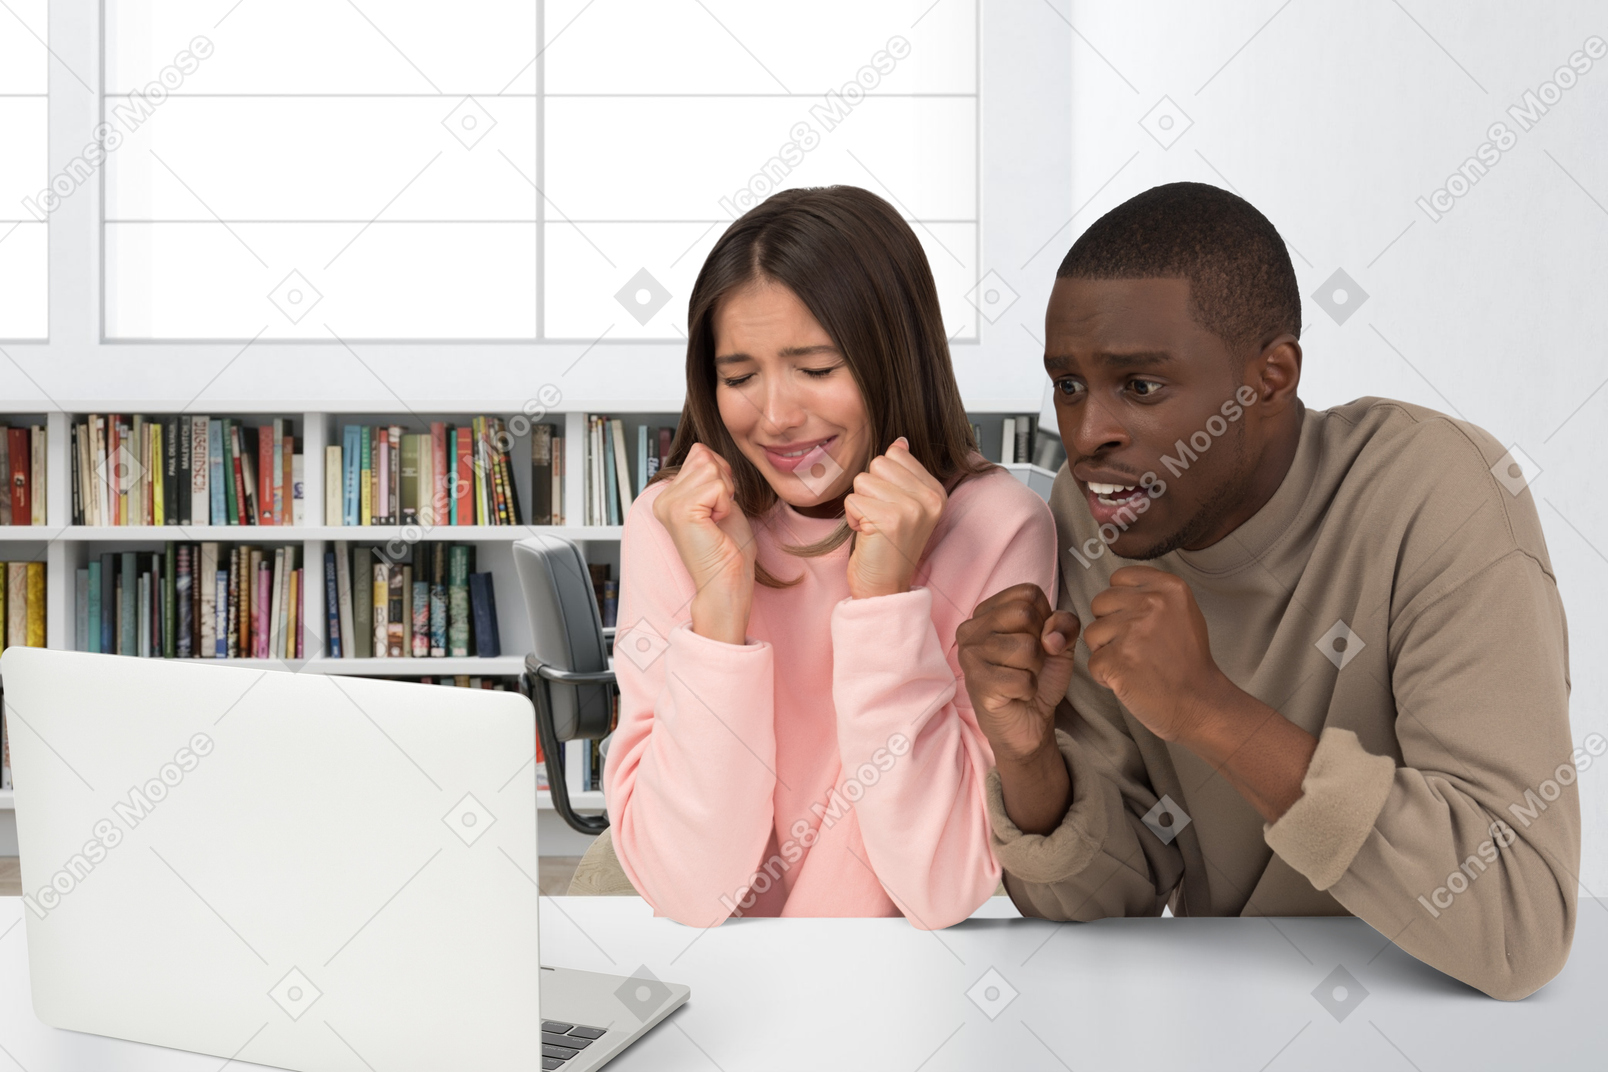 A scared man and a scared woman looking at a laptop